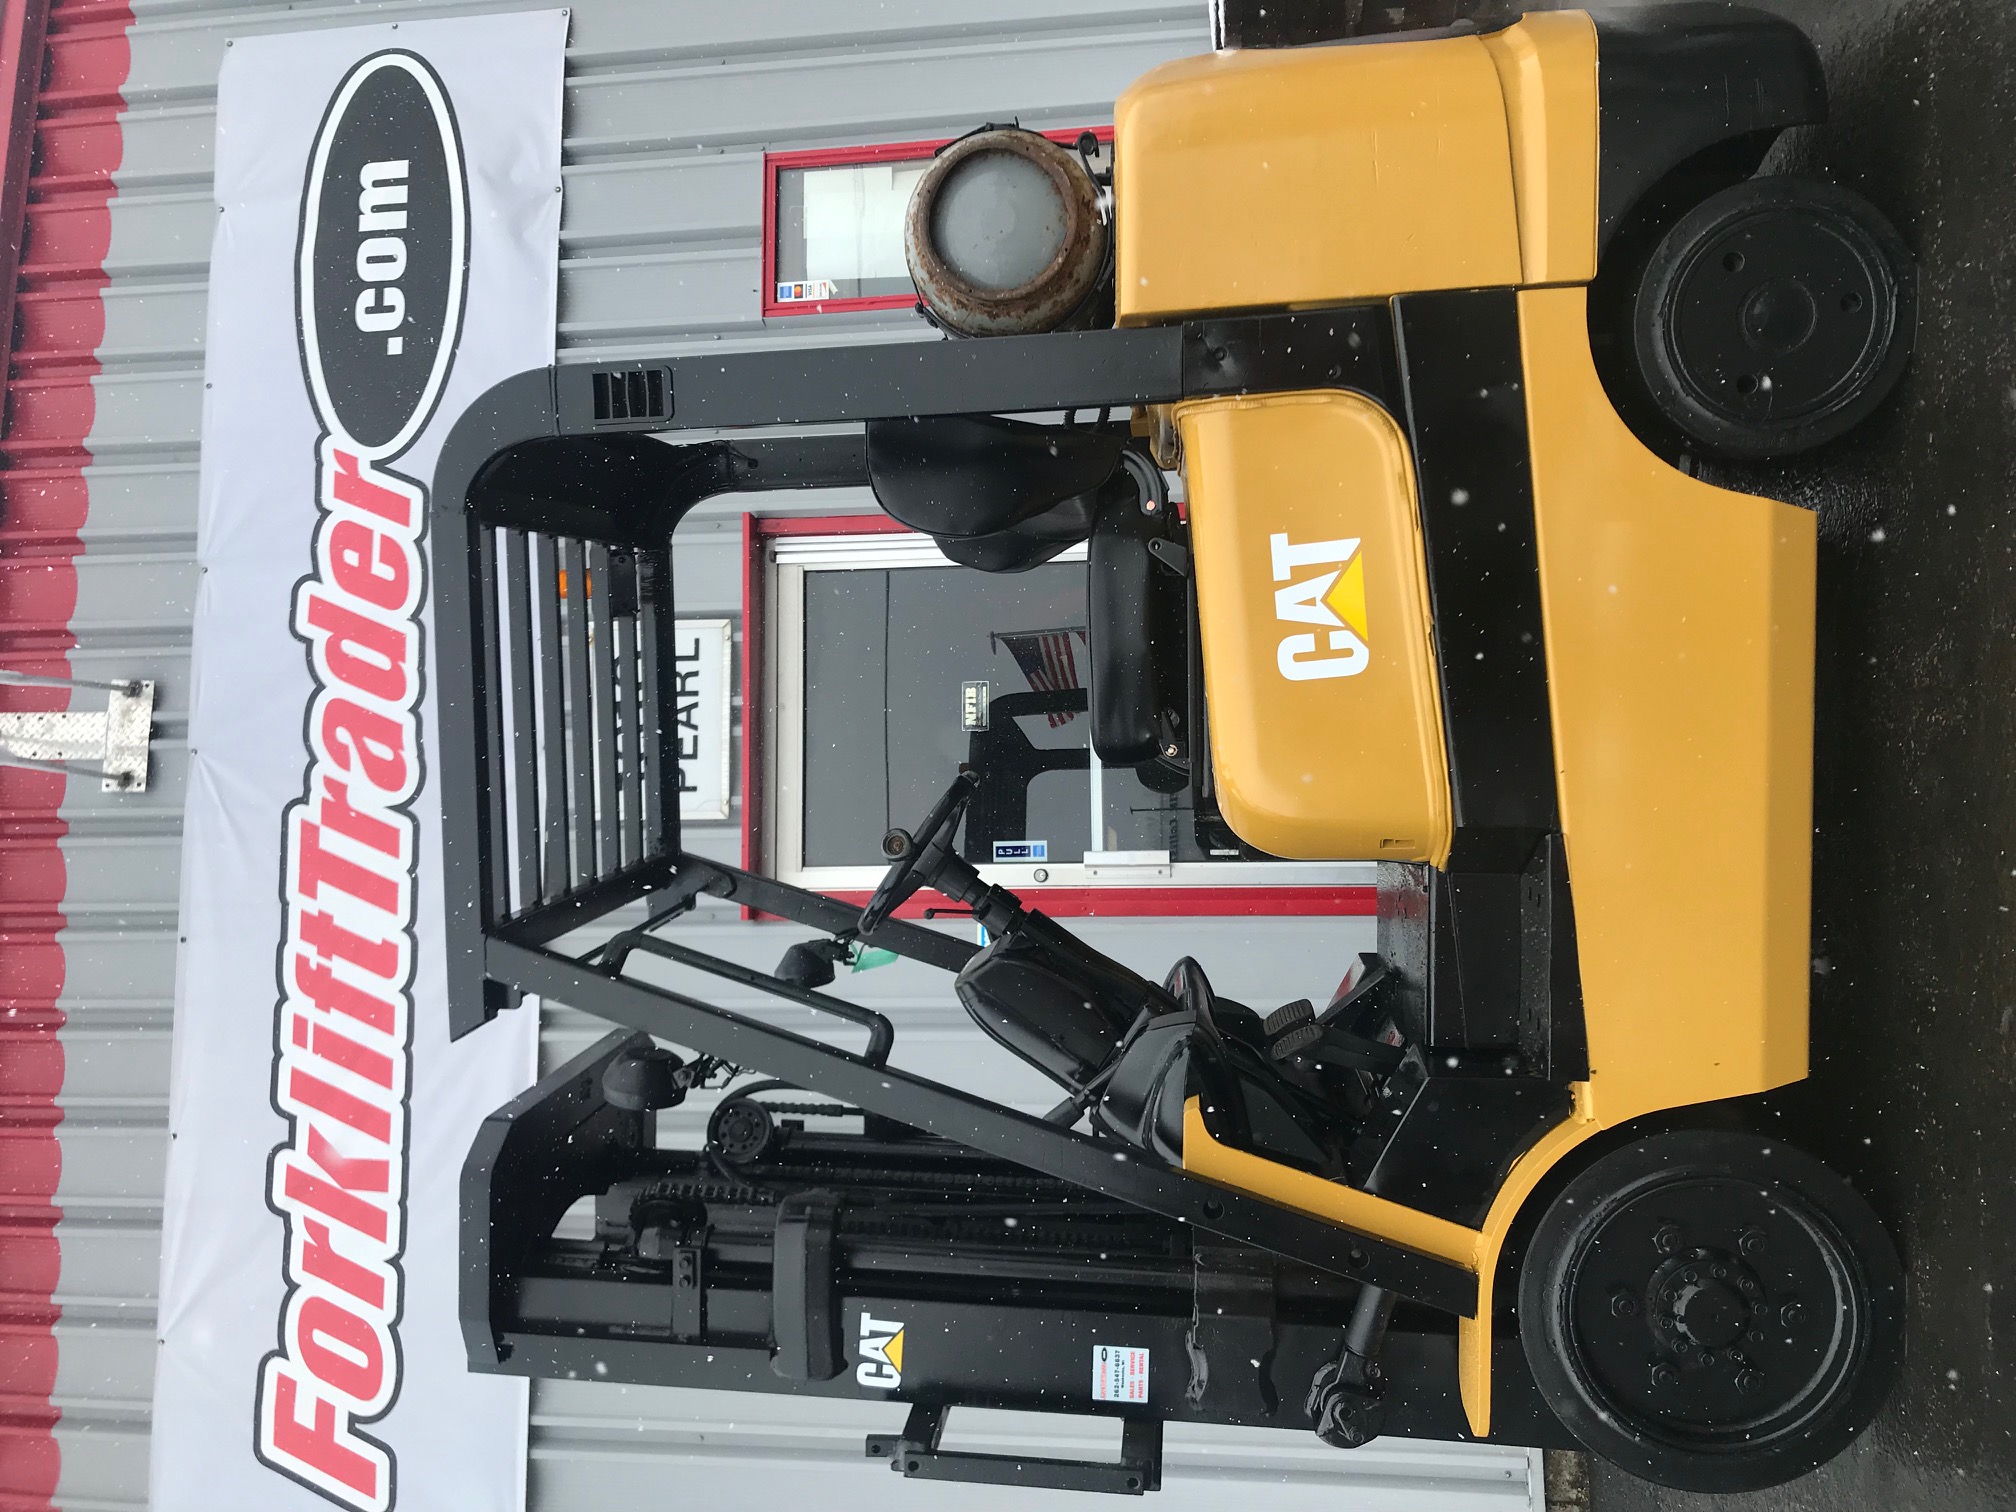 Power steering 2001 yellow caterpillar forklift for sale